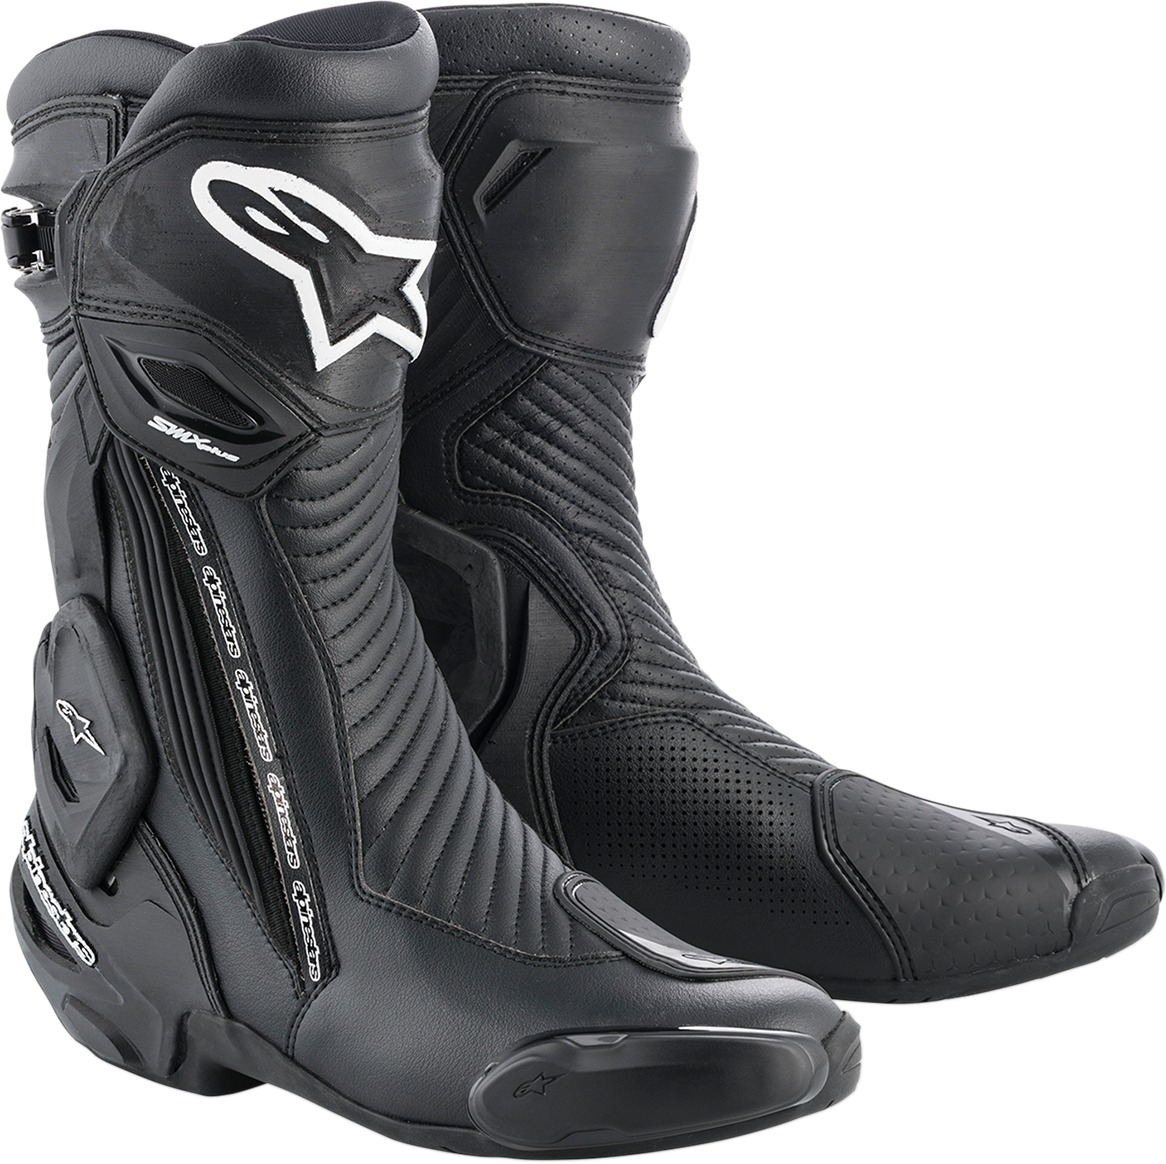 SMX Plus Street Riding Boots Black US 10.5 - Click Image to Close